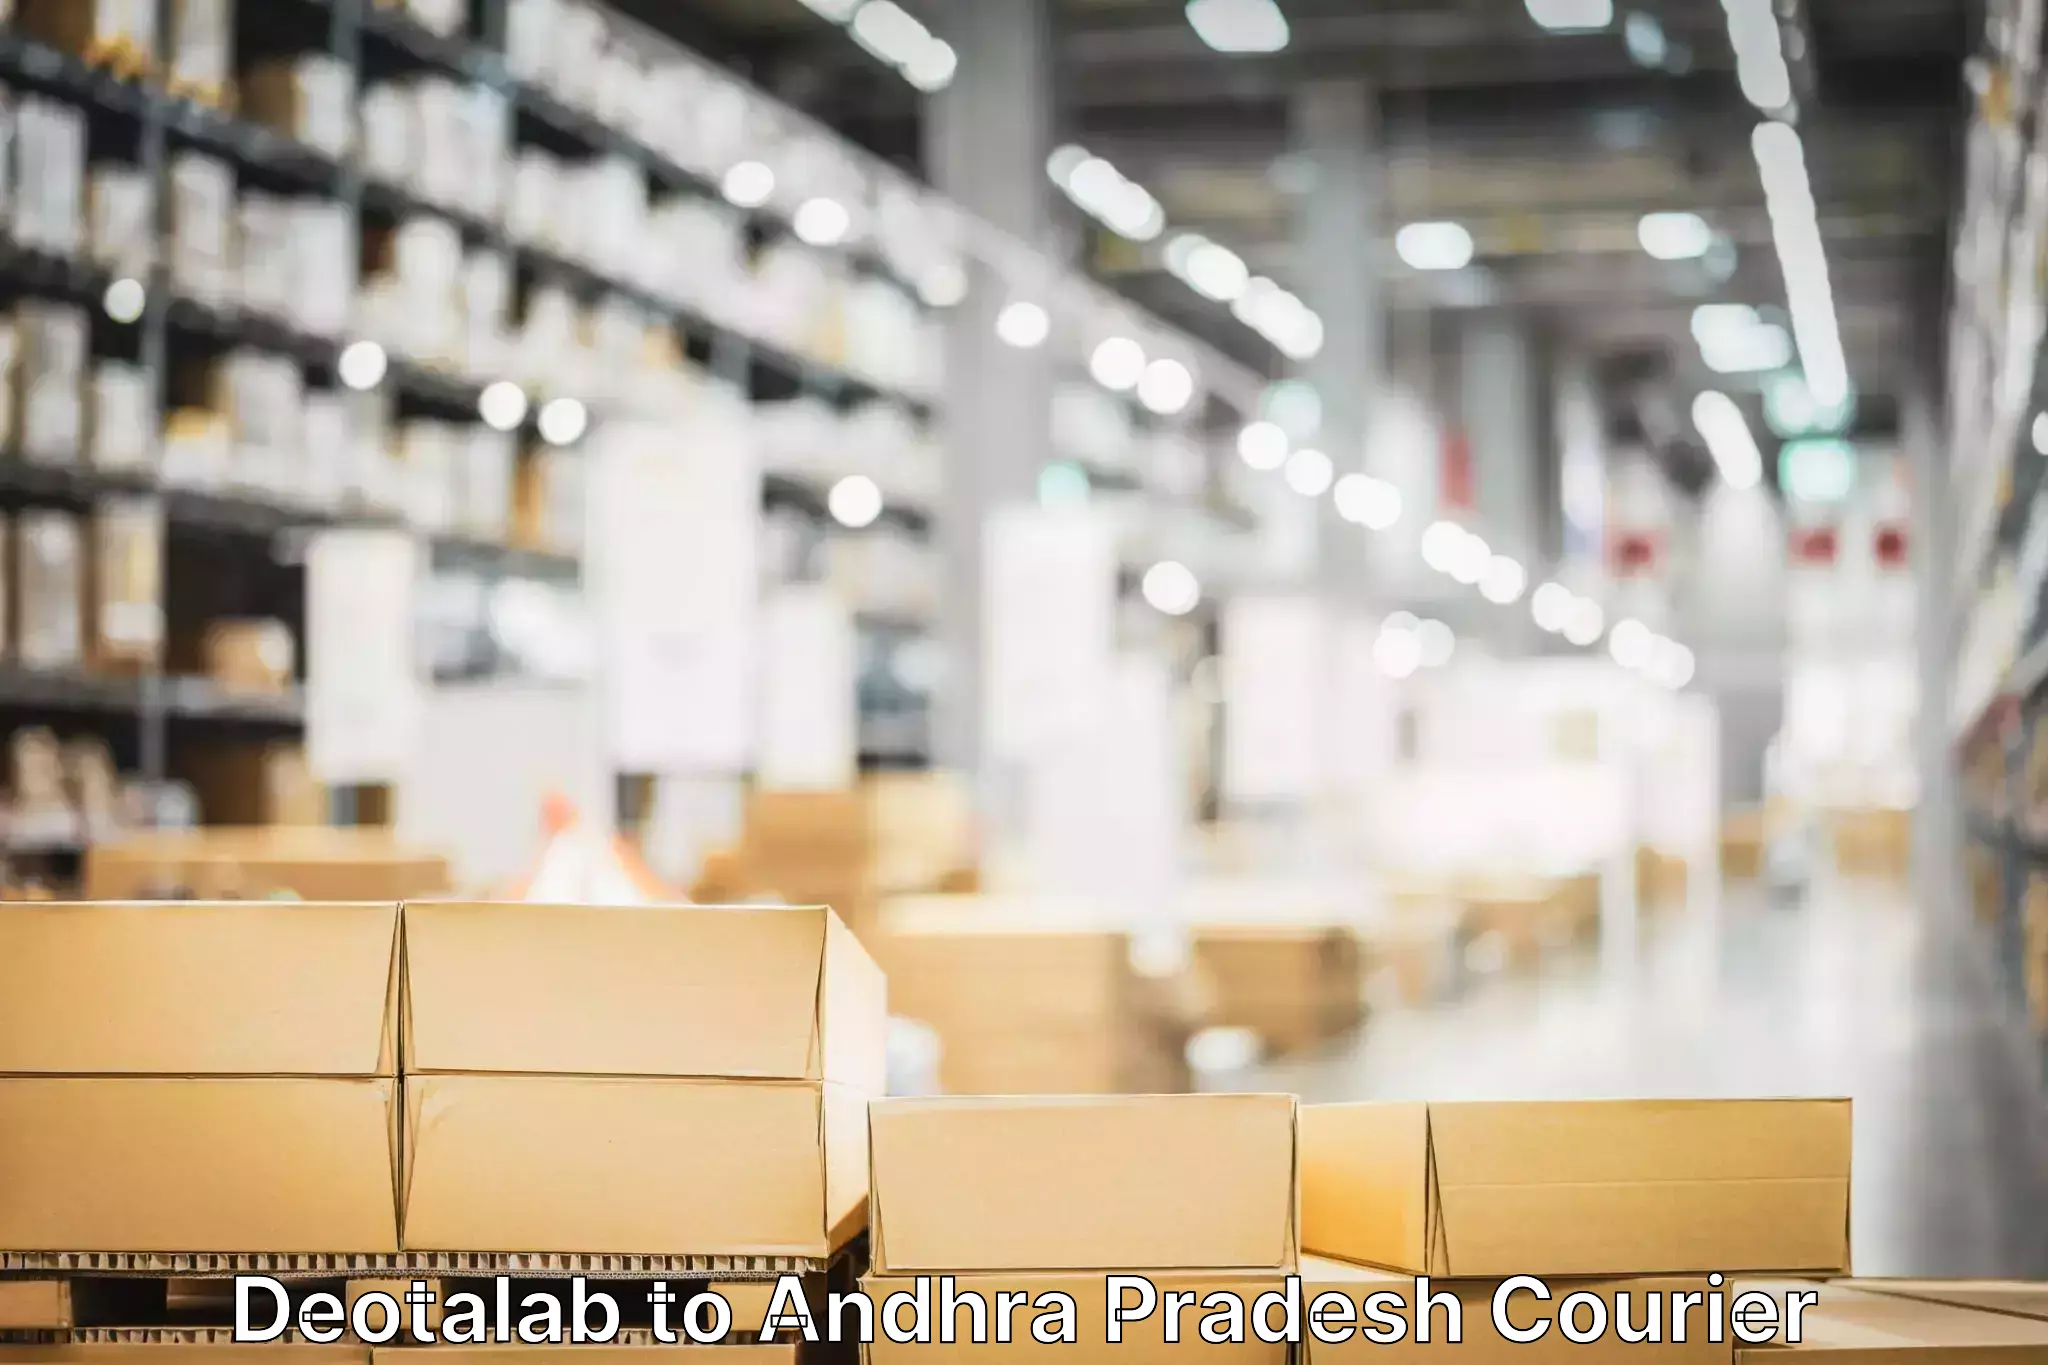 Full-service courier options Deotalab to Andhra Pradesh